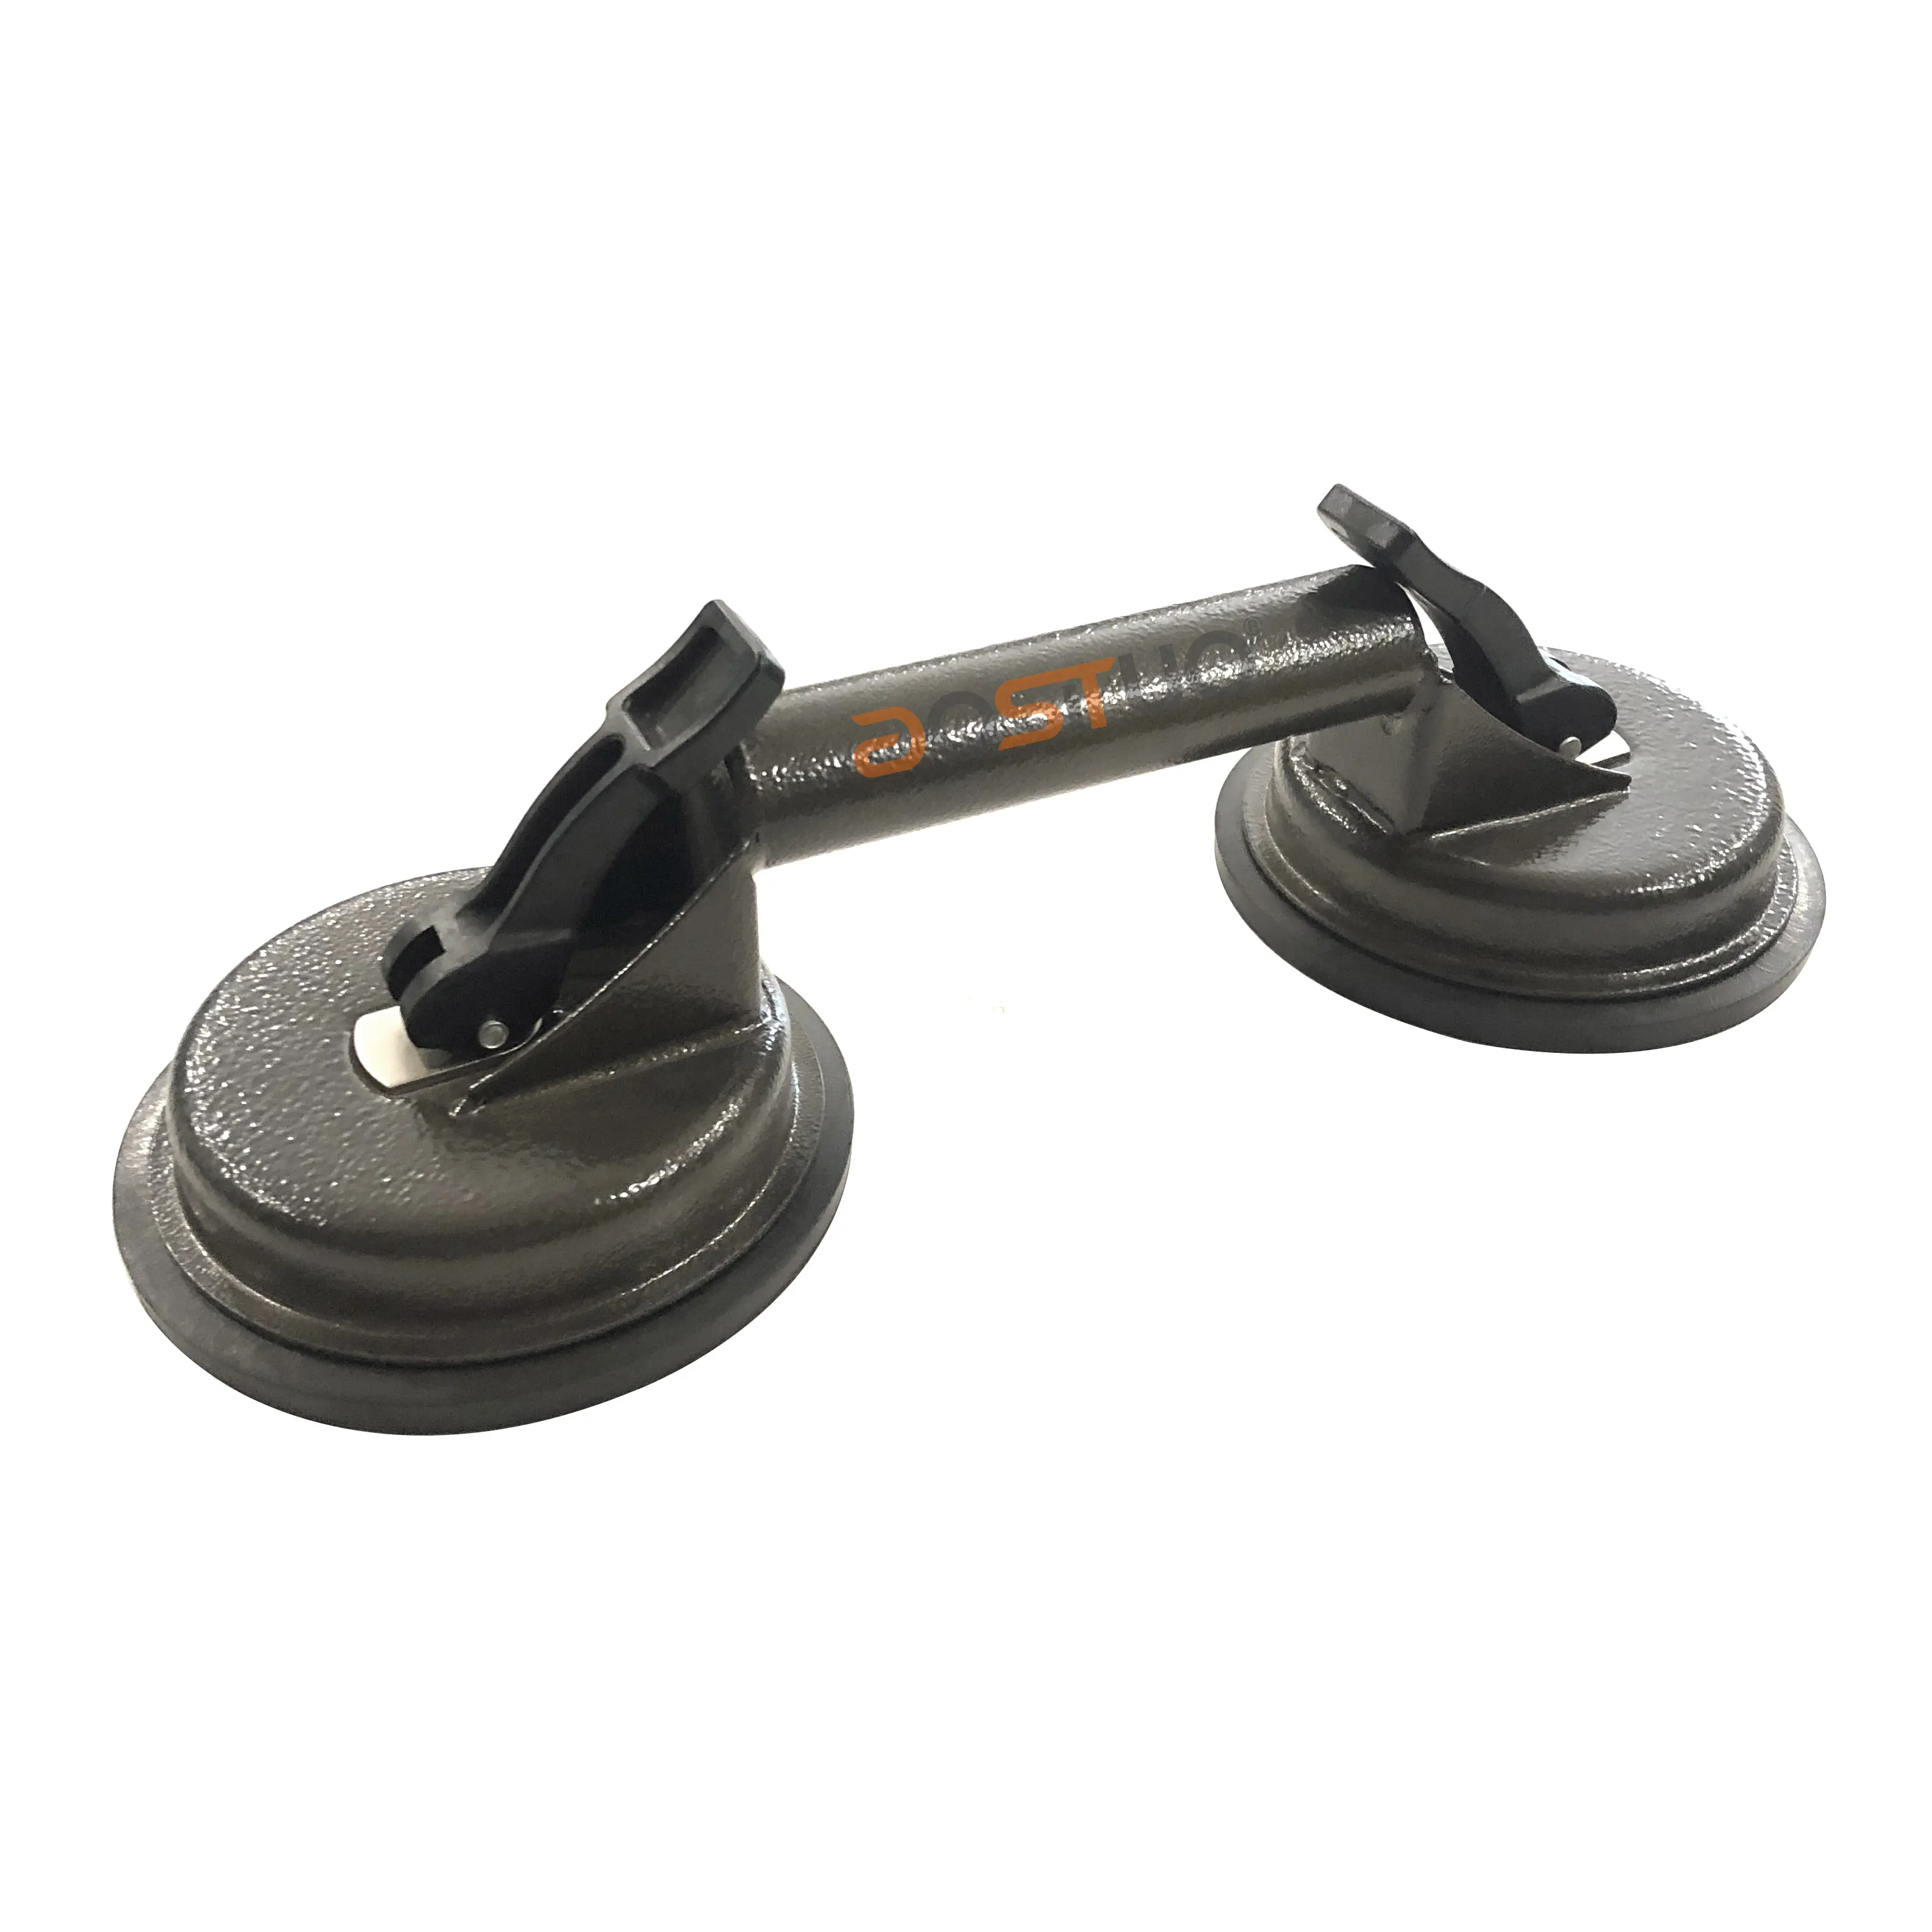 Other Hand Tool Steel Suction Cup Lifter Vacuum Plate Glass Sucker For Stone Glass Slab Lifting Remover Puller